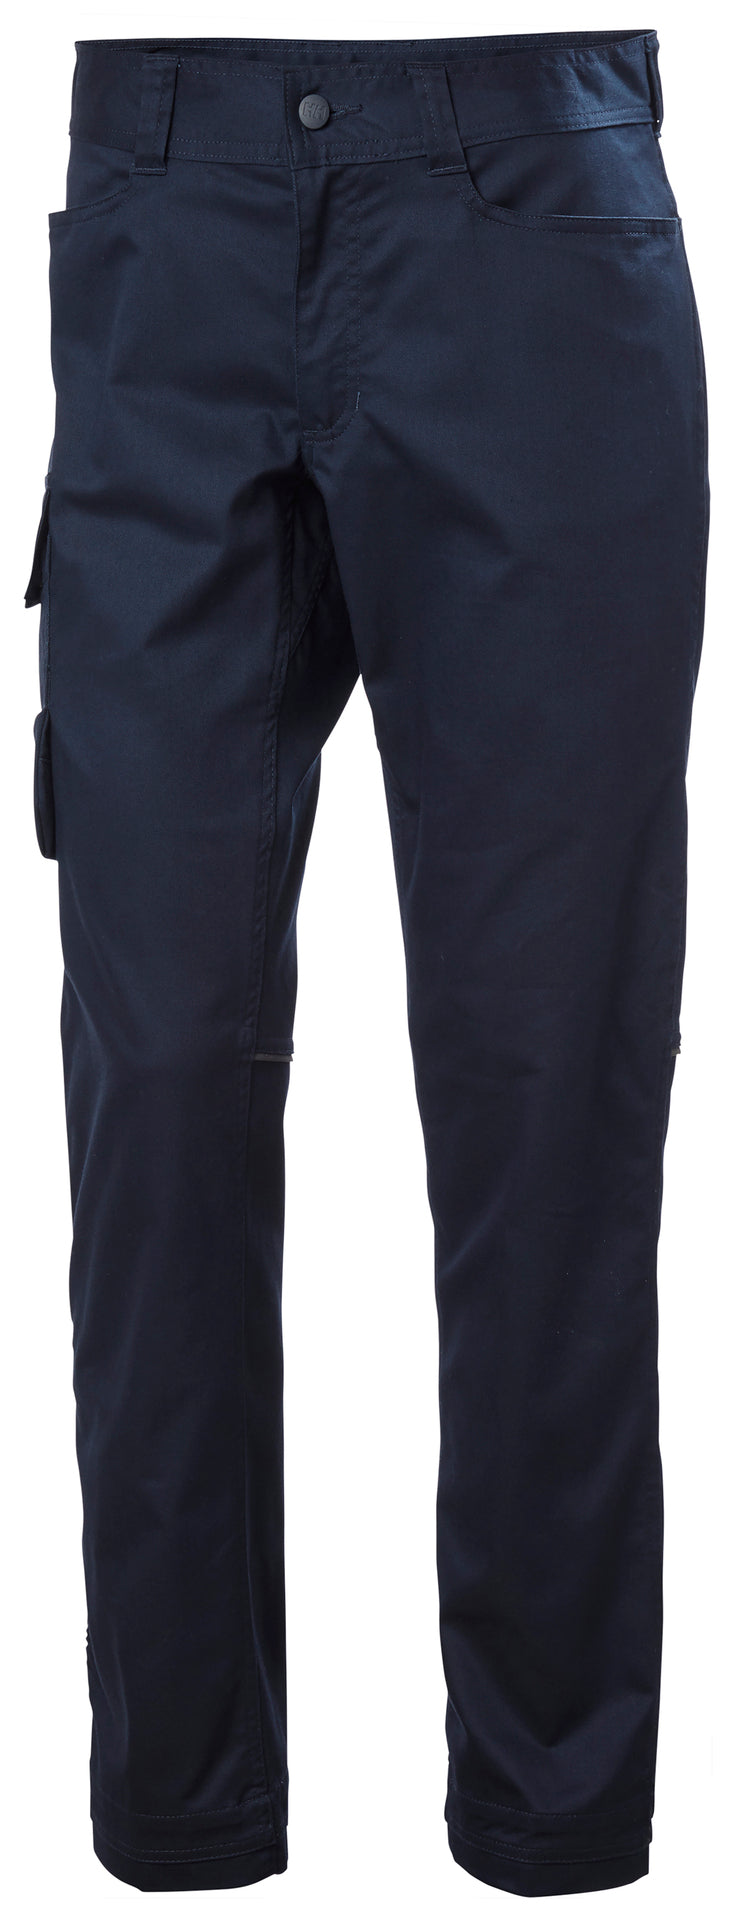 Helly Hansen Manchester Service Trousers - Navy